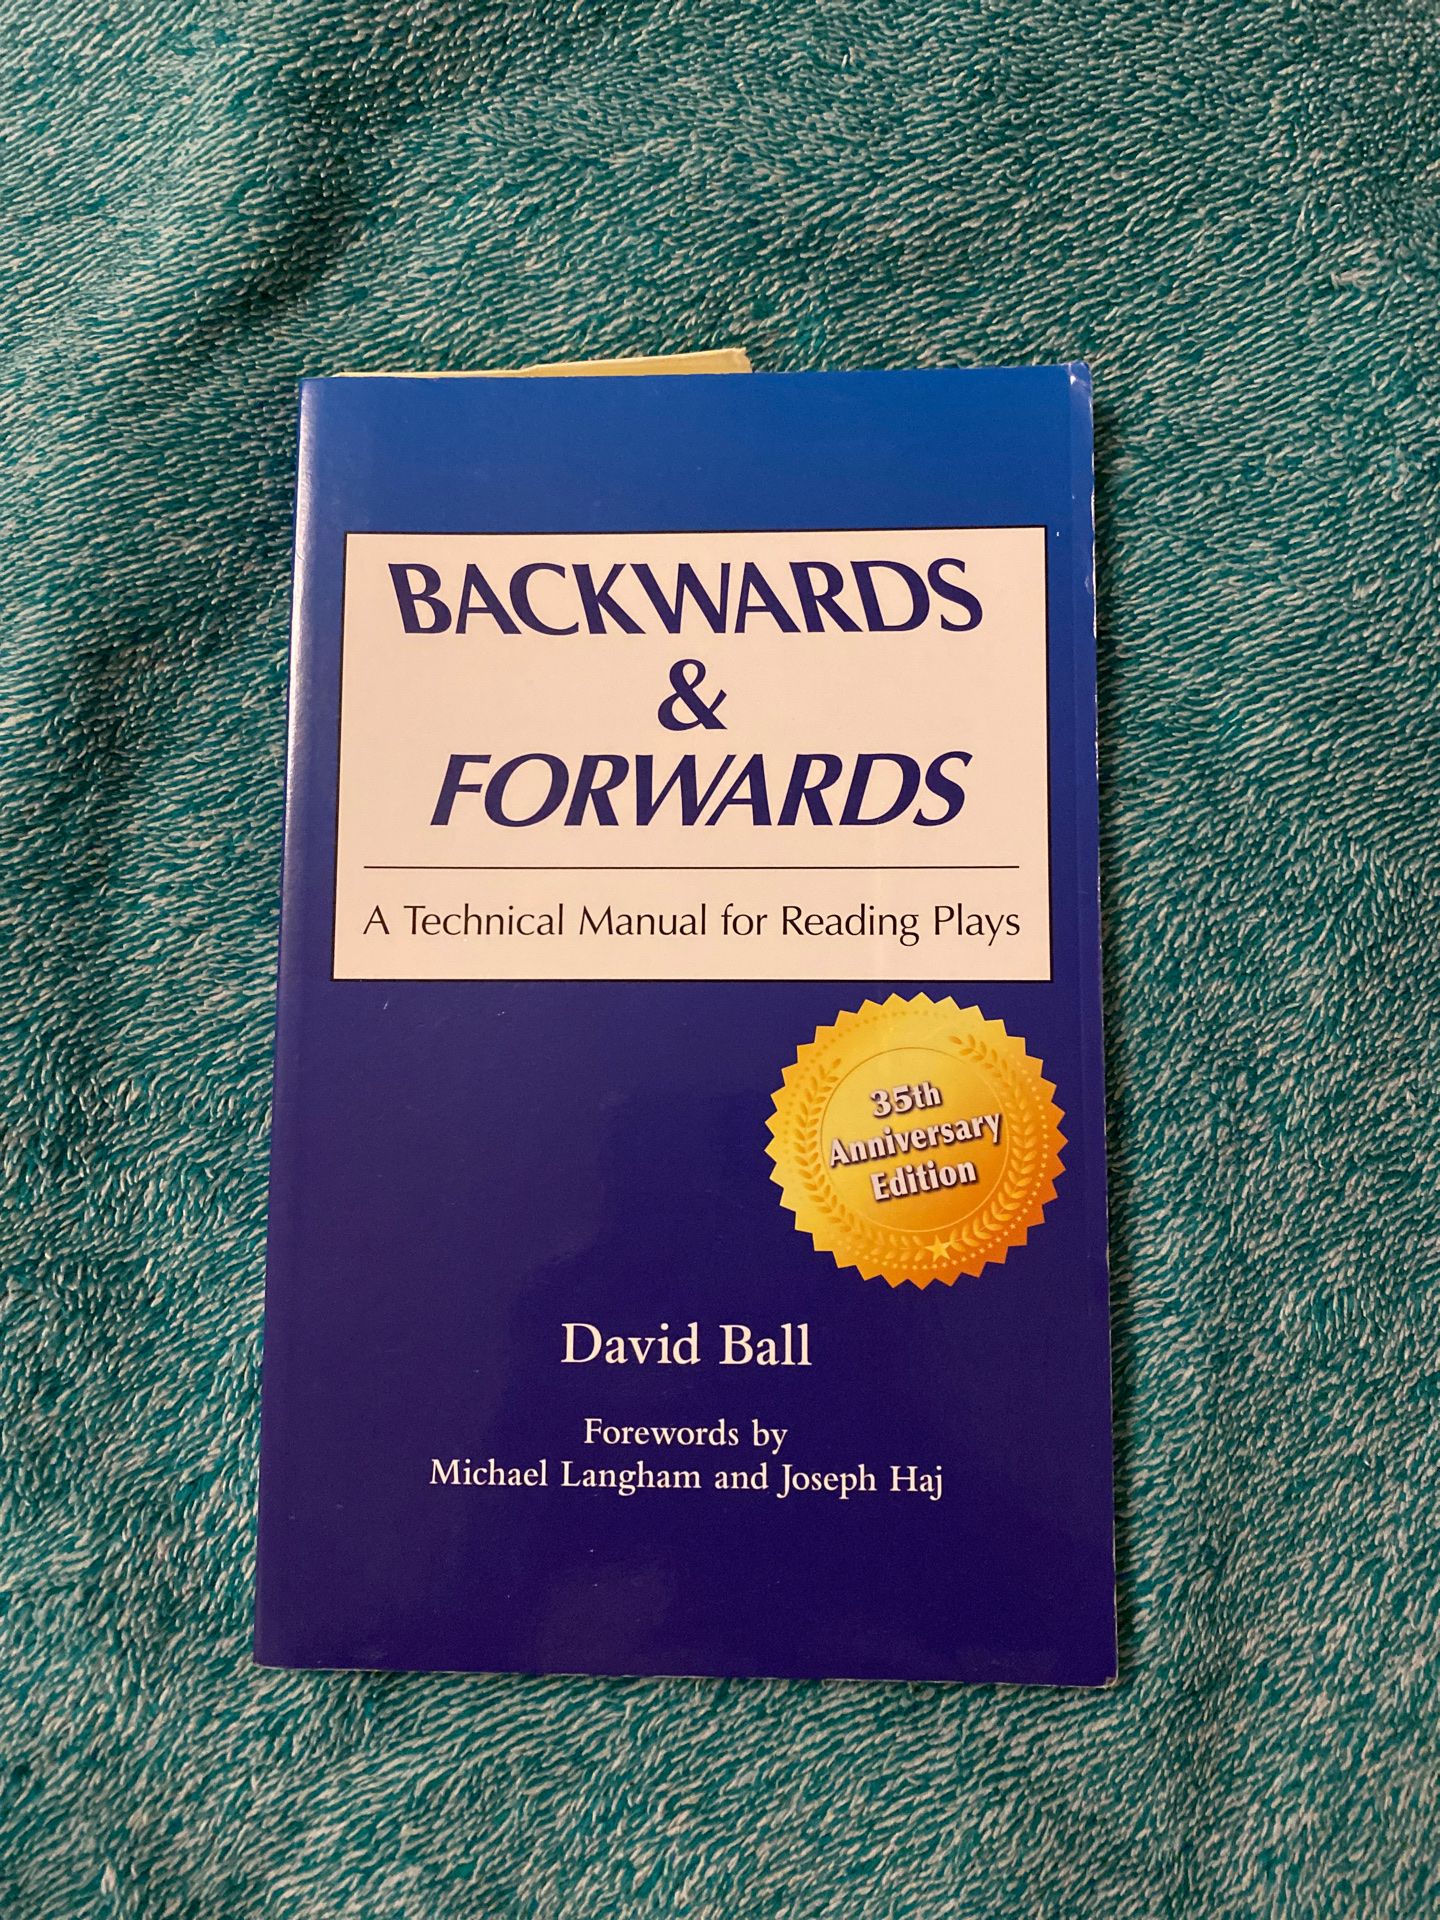 Ball’s Backwards and Forwards: A Technical Manual for Reading Plays